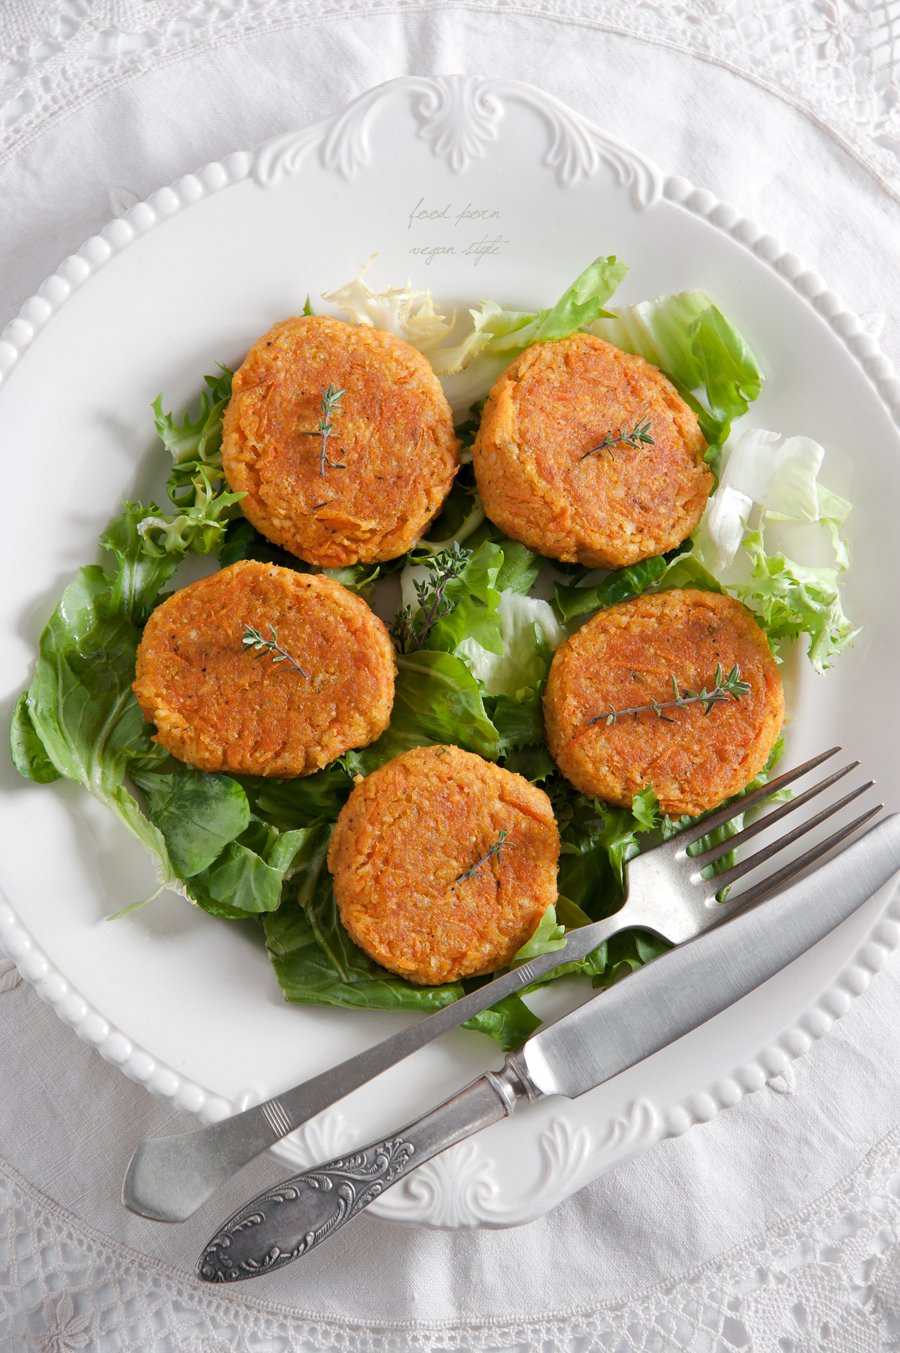 Aromatic vegan patties with carrot and millet